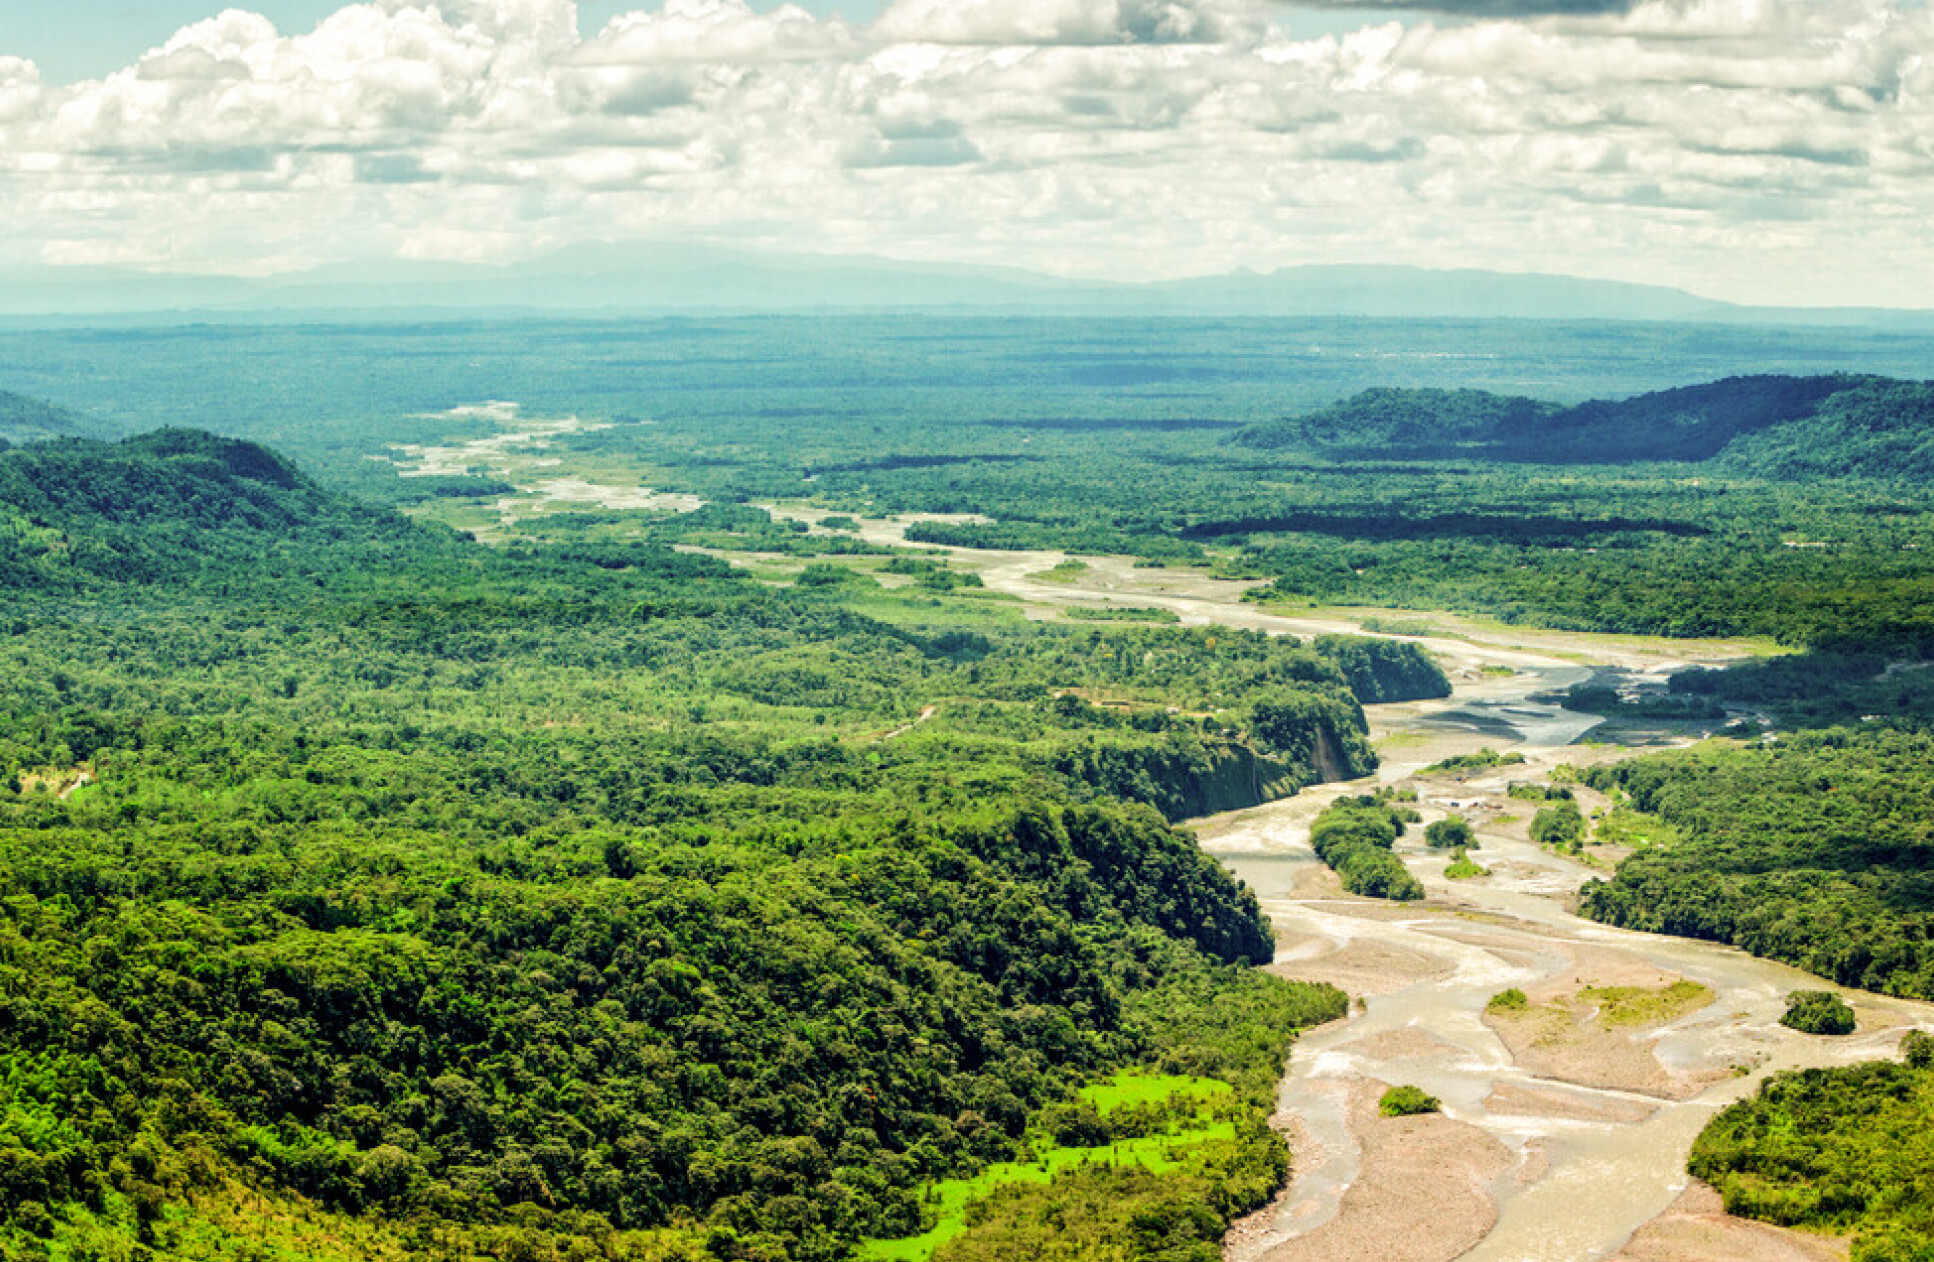 Aerial view of a wide river in a forested landscape